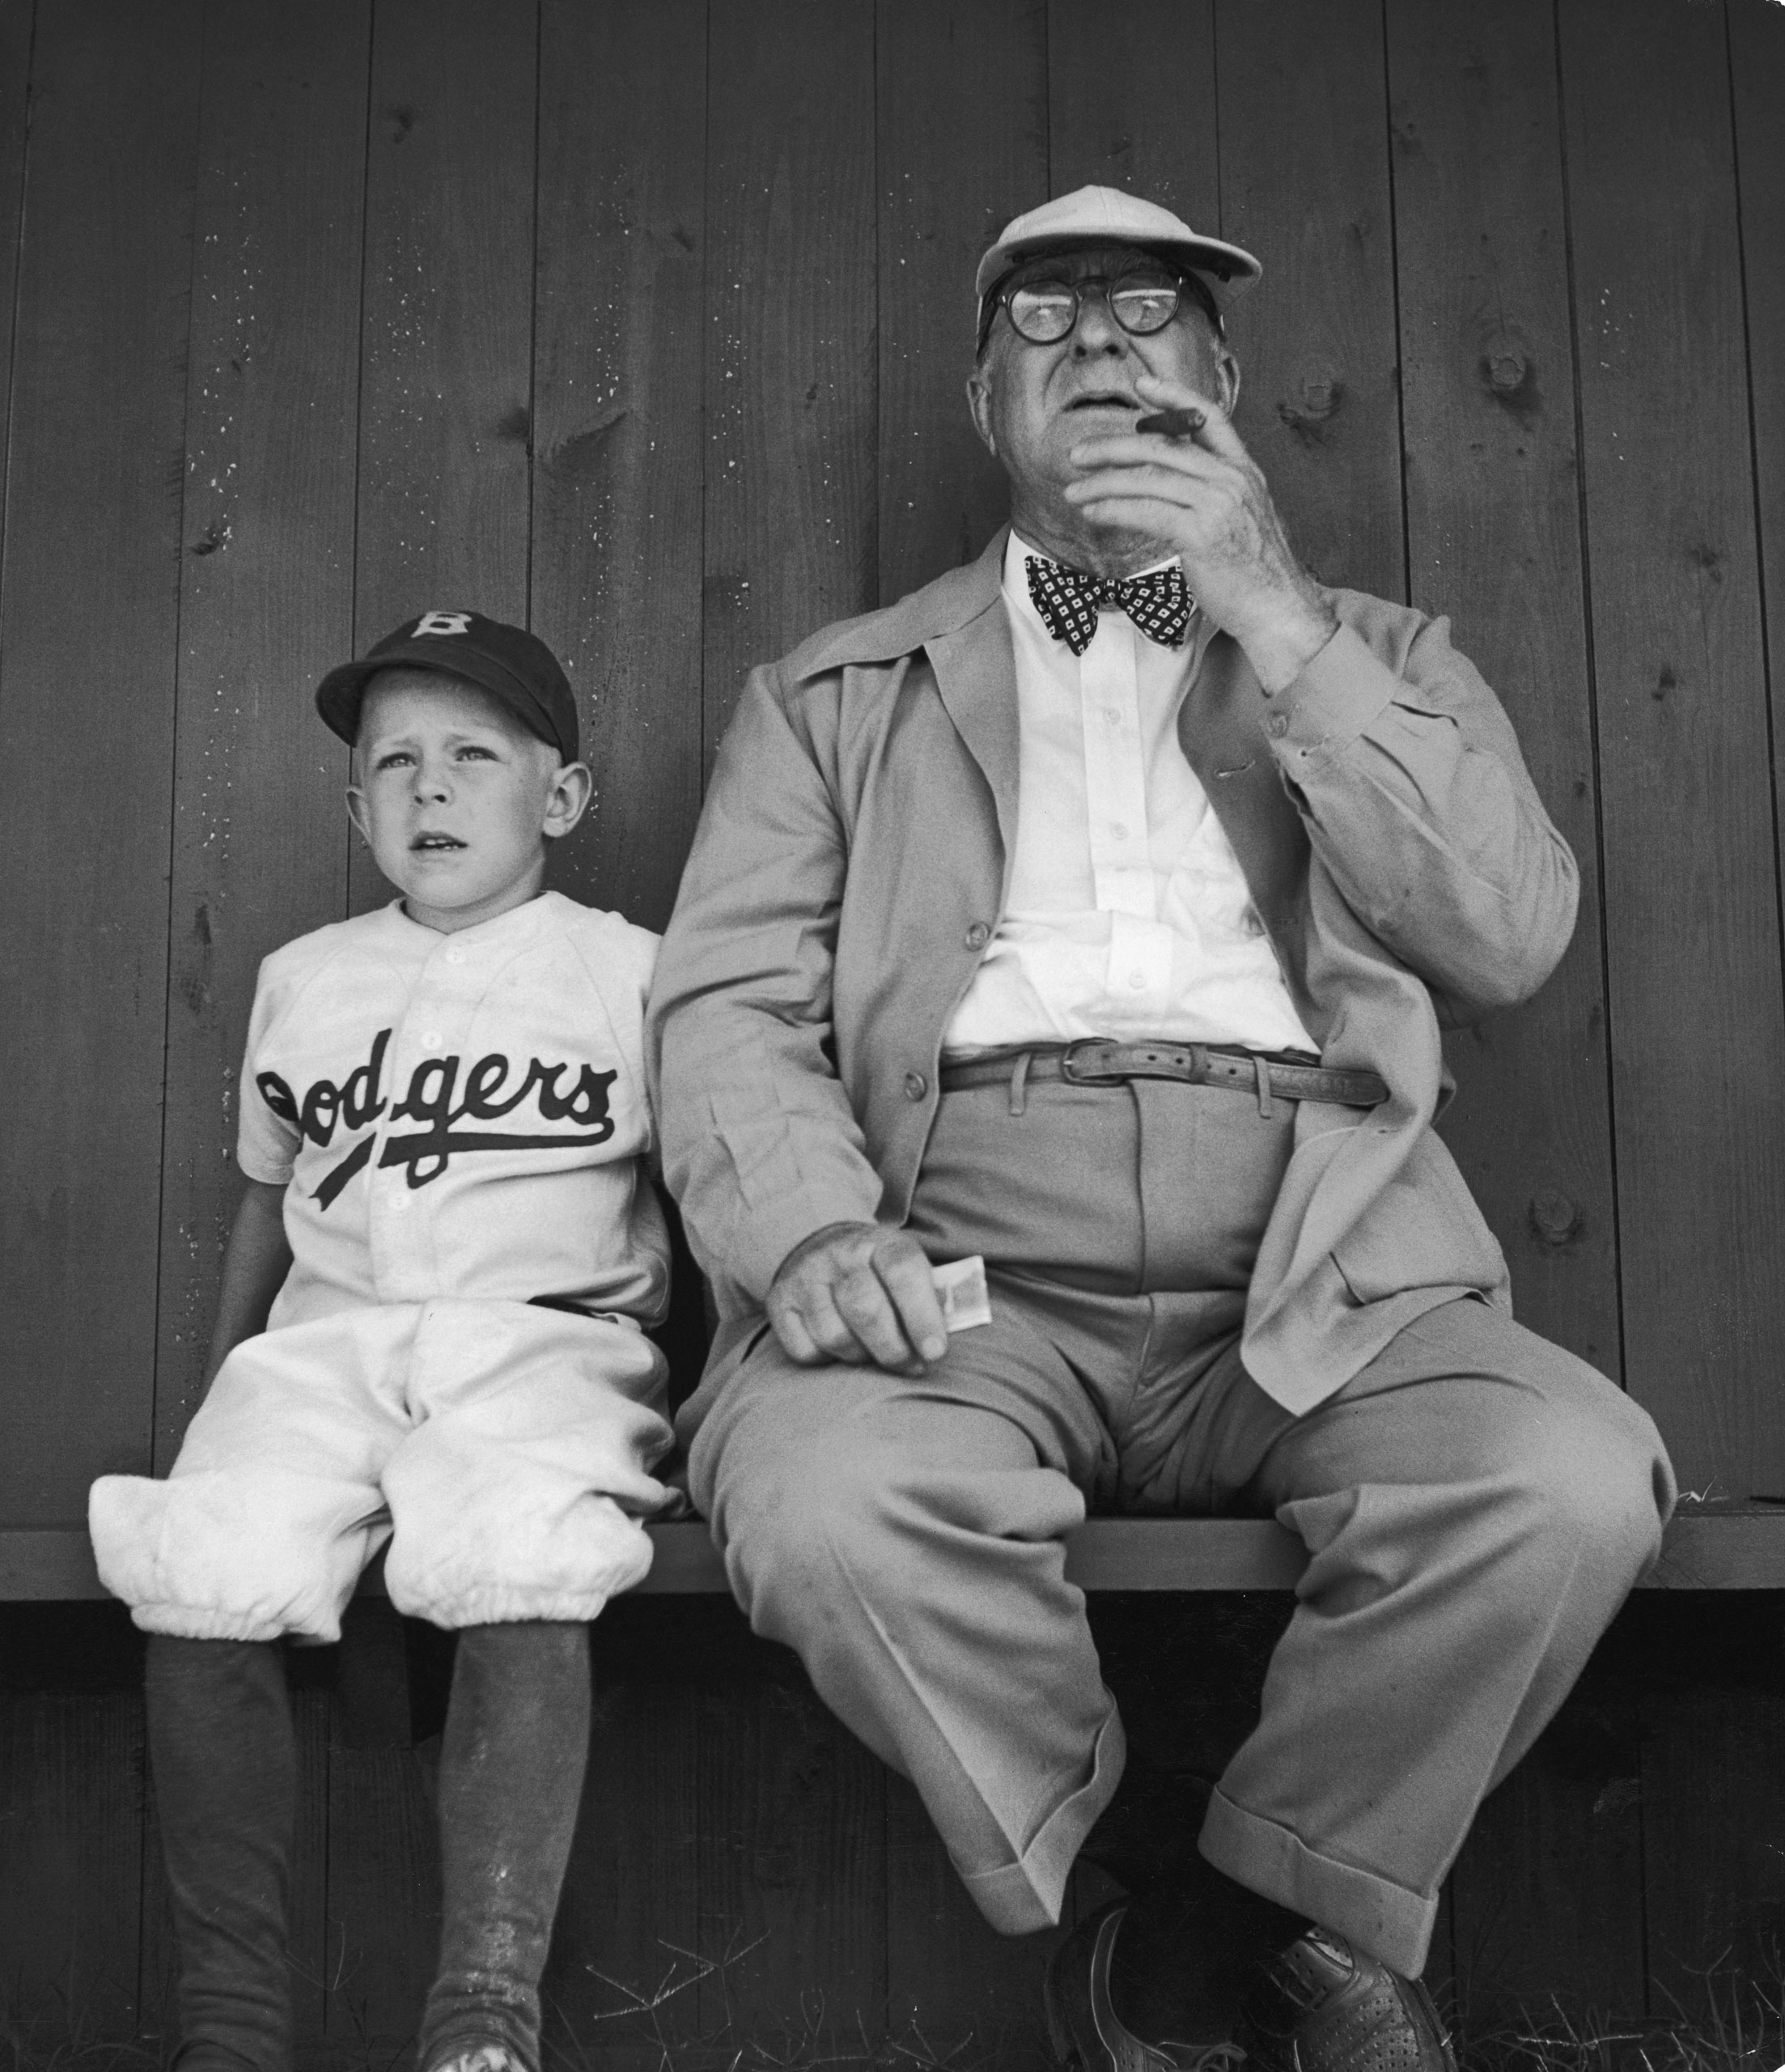 Branch Rickey watches practice with his grandson during spring training at Dodgertown, Vero Beach, Fla., 1948.